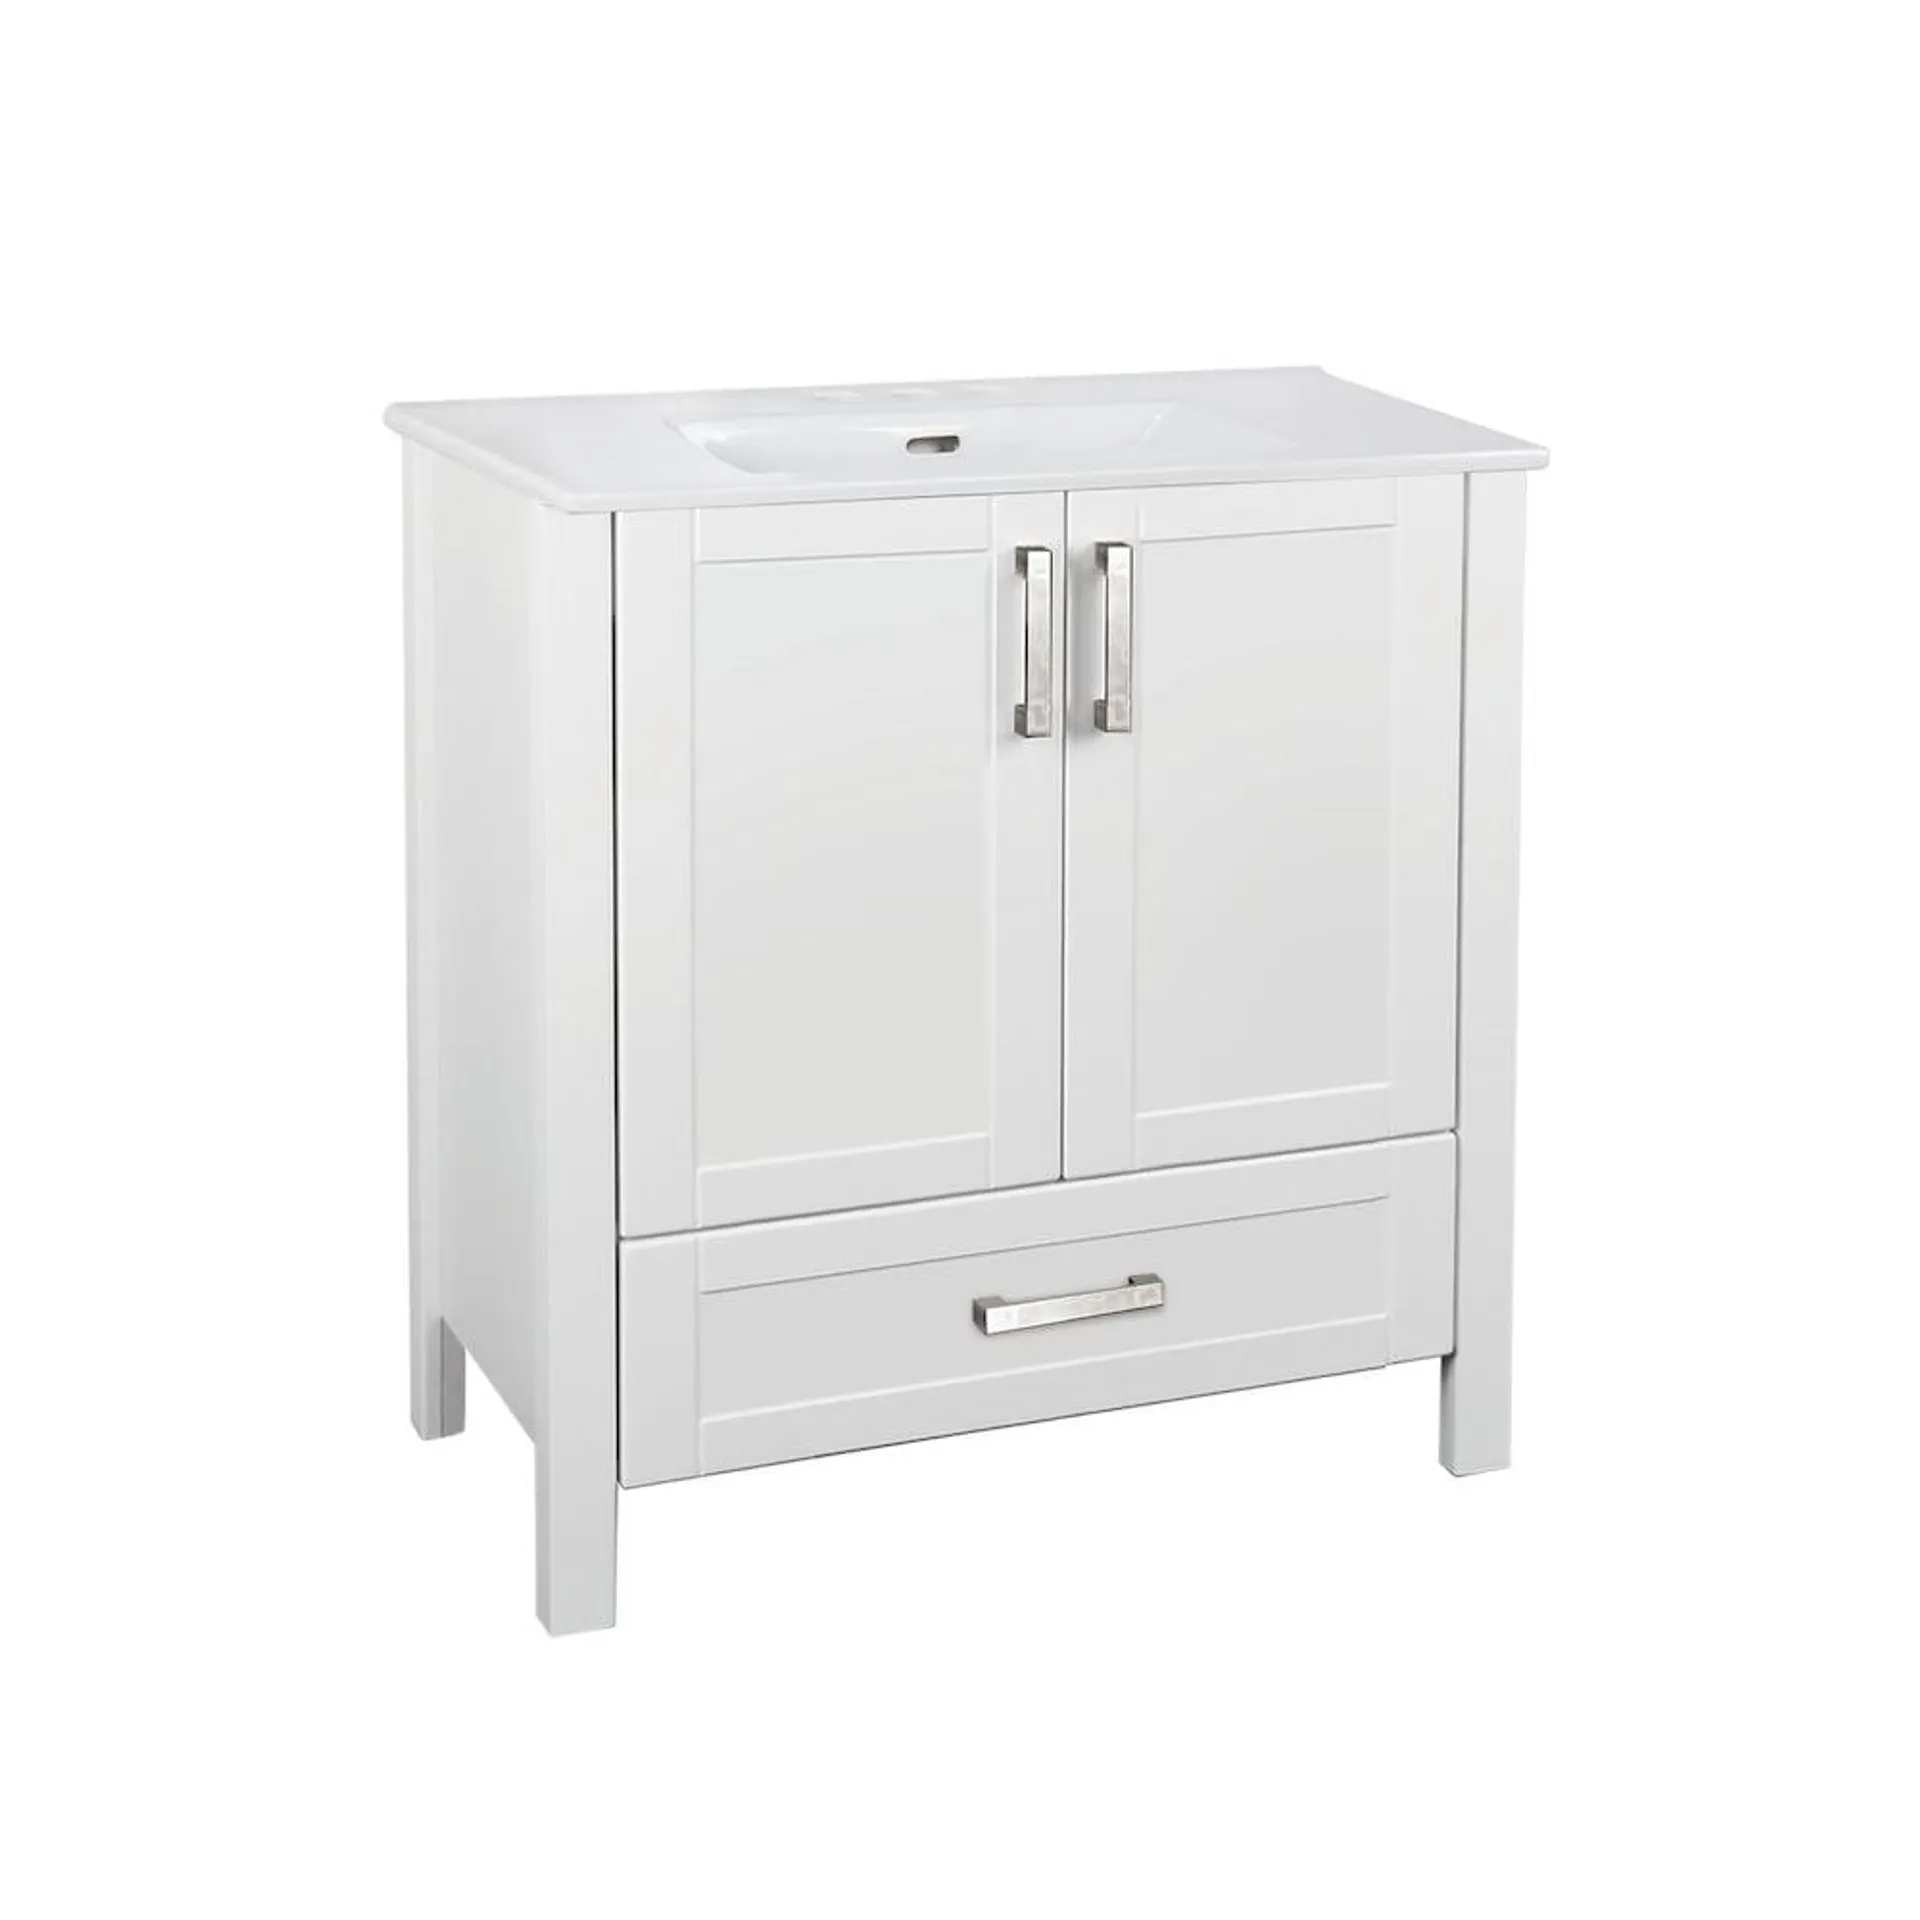 Delchester 30 inch Vanity with Thin Ceramic Top, White Finish